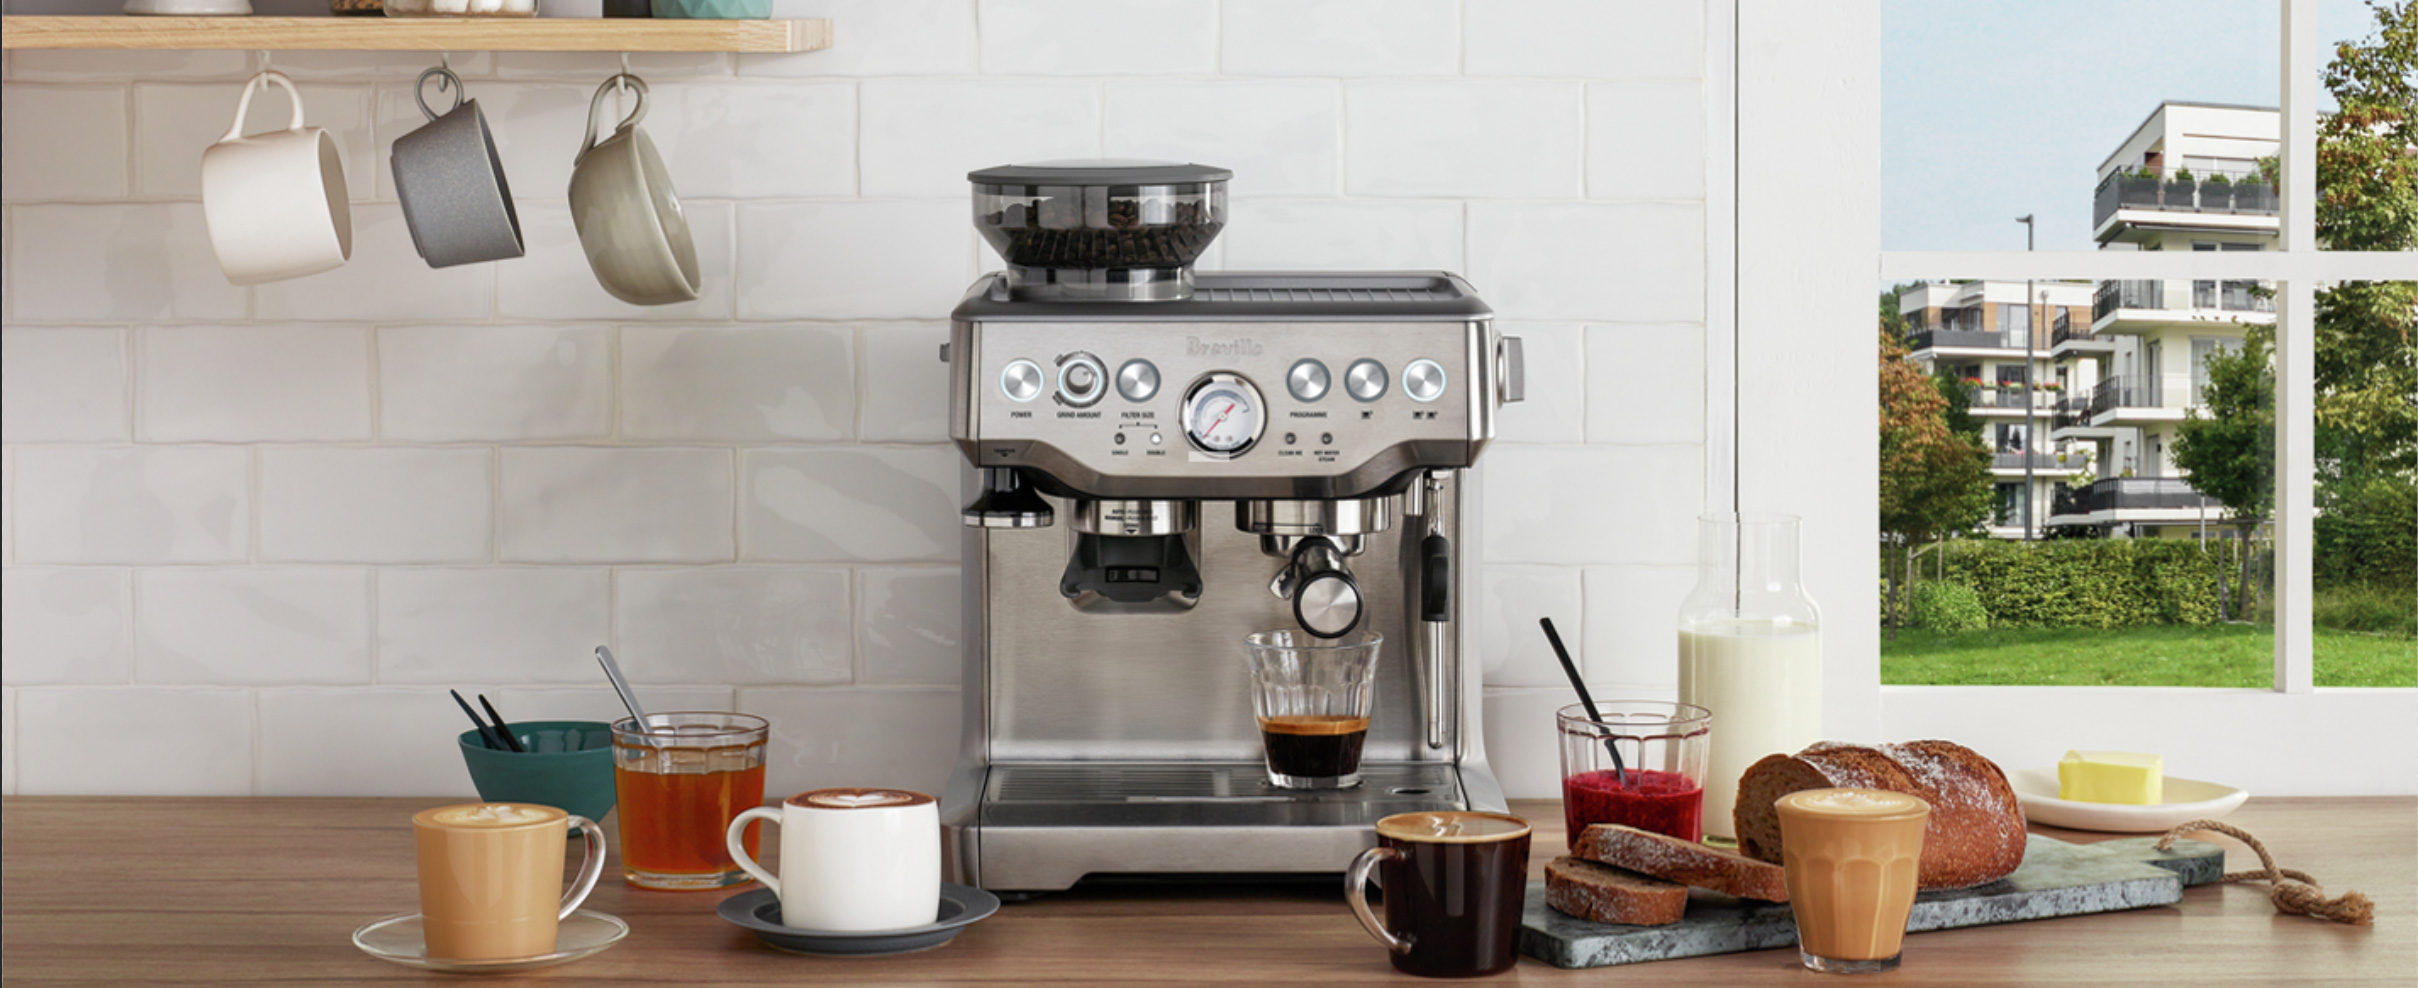 Create third-wave specialty coffee at home.